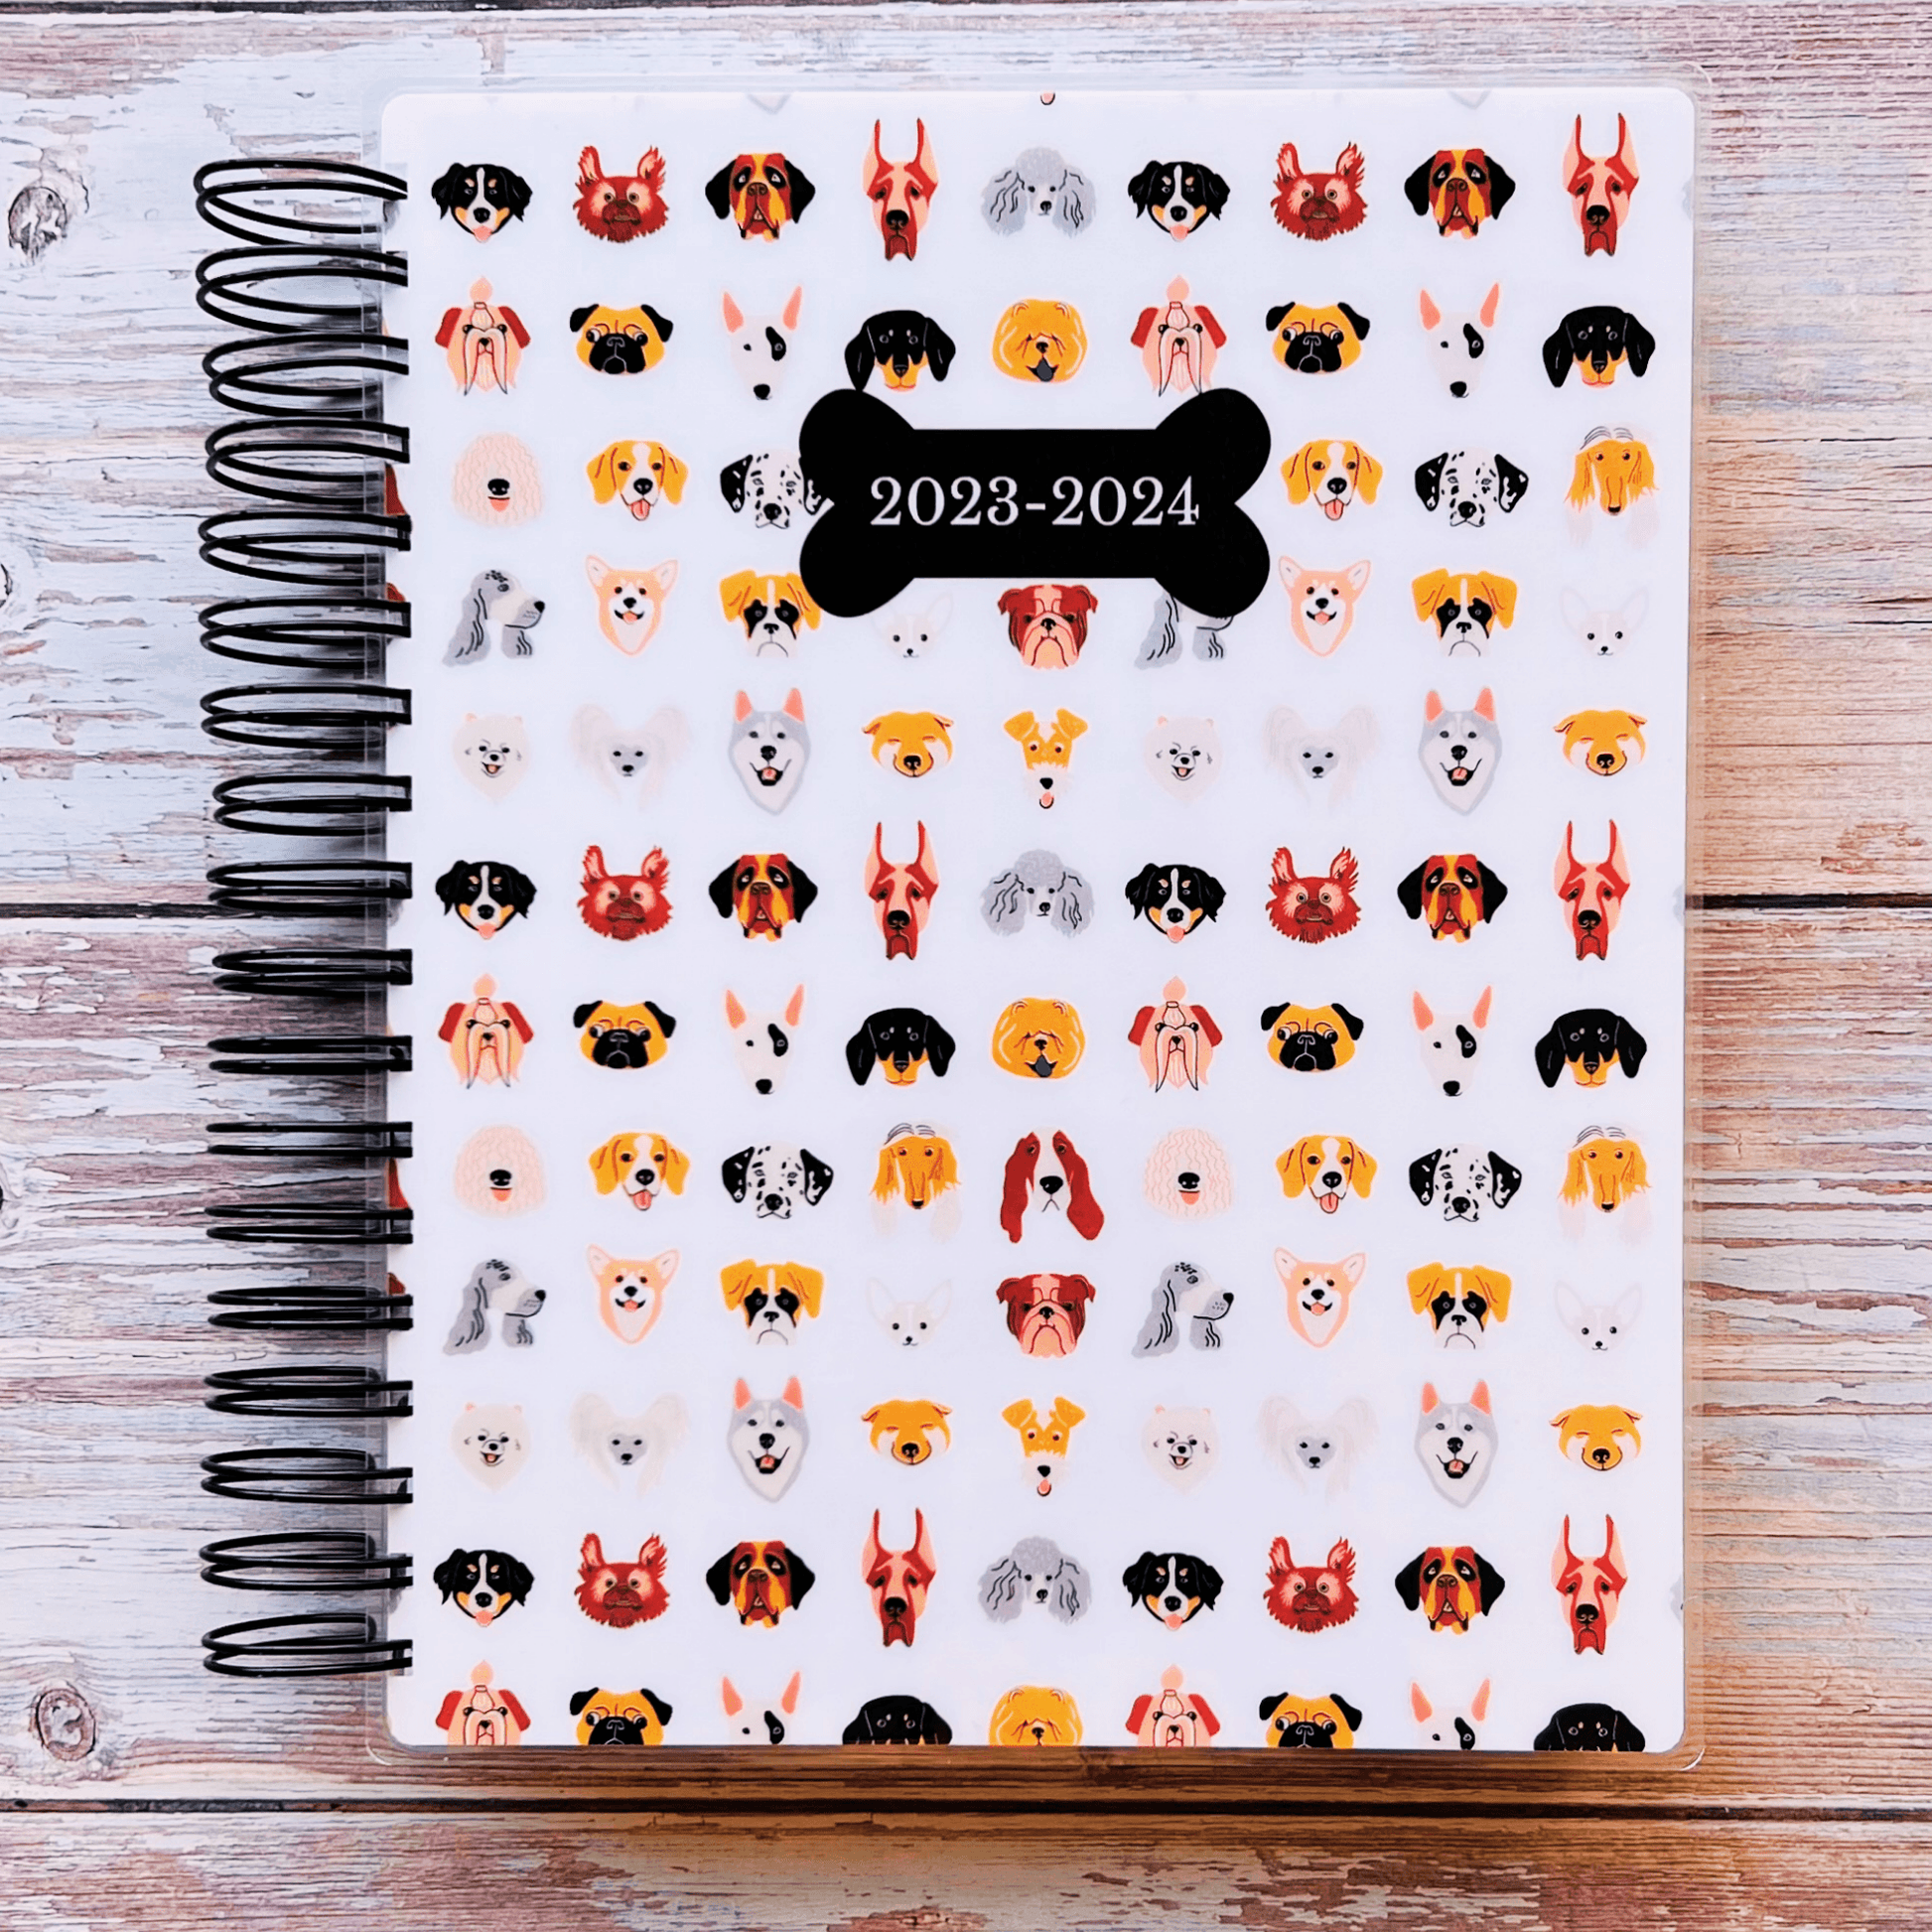 2023-2024 Personalized Monthly Planner - Dog Love Monthly Planners Artful Planner Co. July-2023 20 Meal Planner Pages added to back +$3.00 